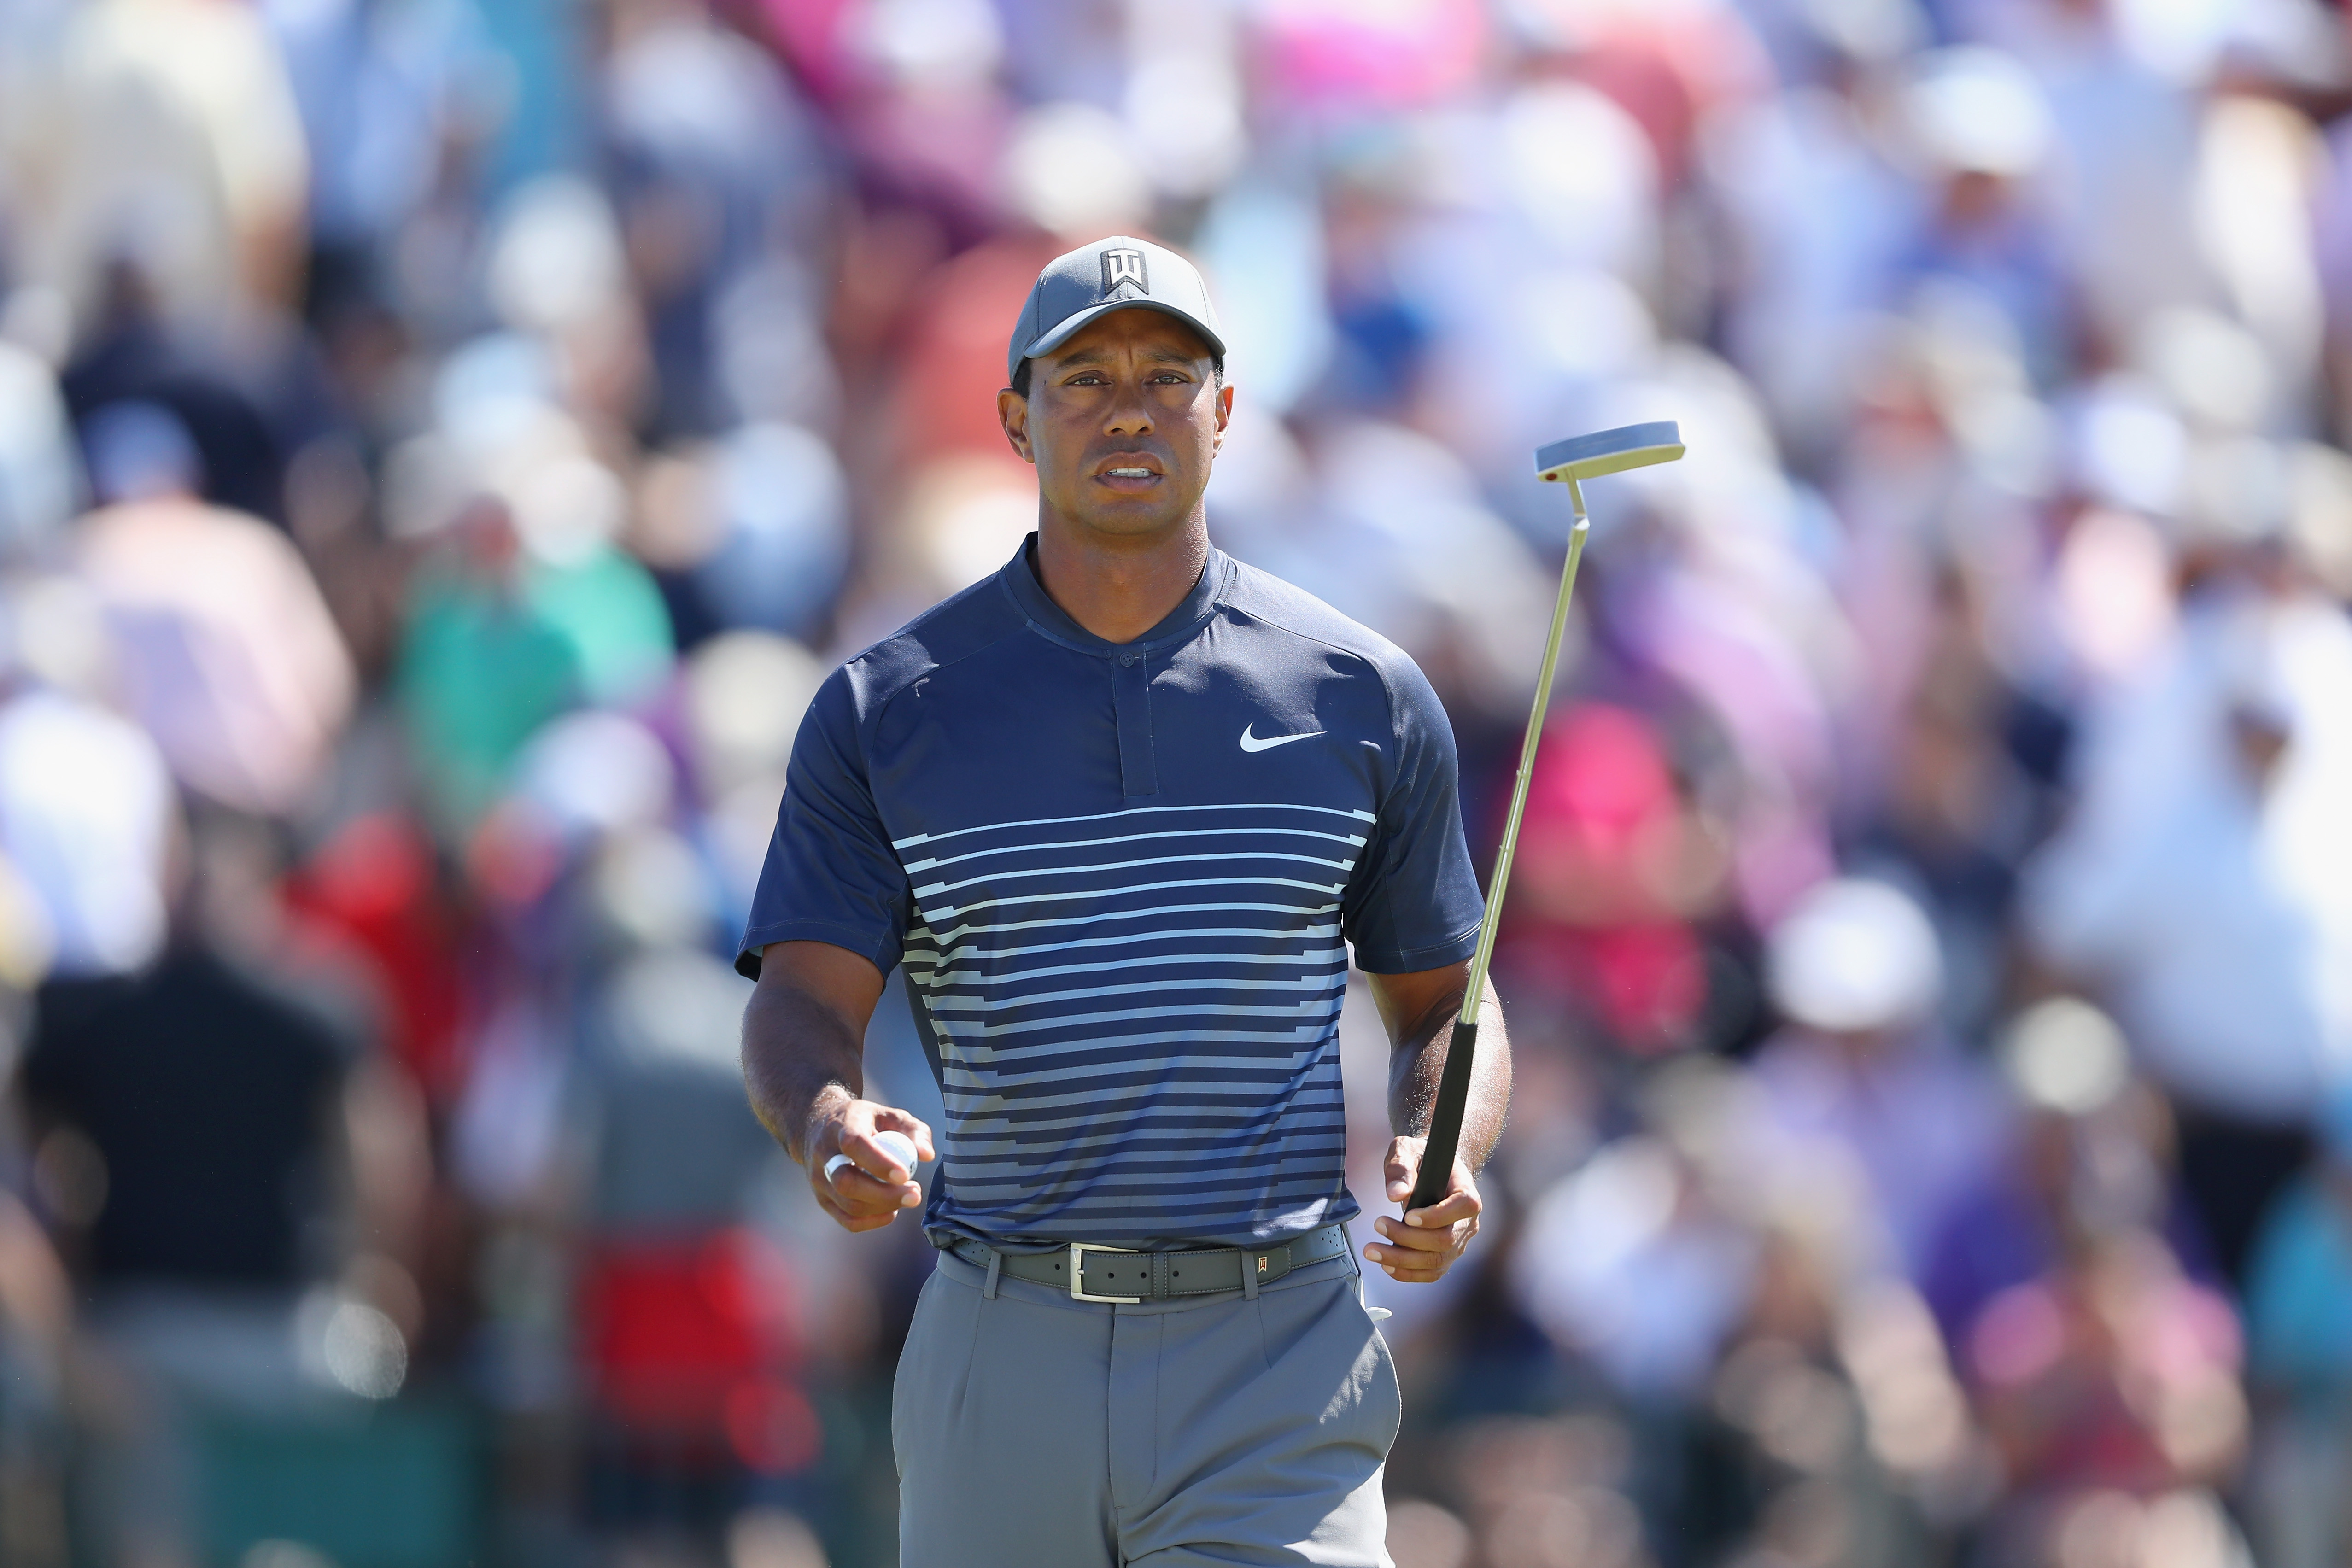 WATCH: Tiger Woods four-putts from 35 feet at US Open